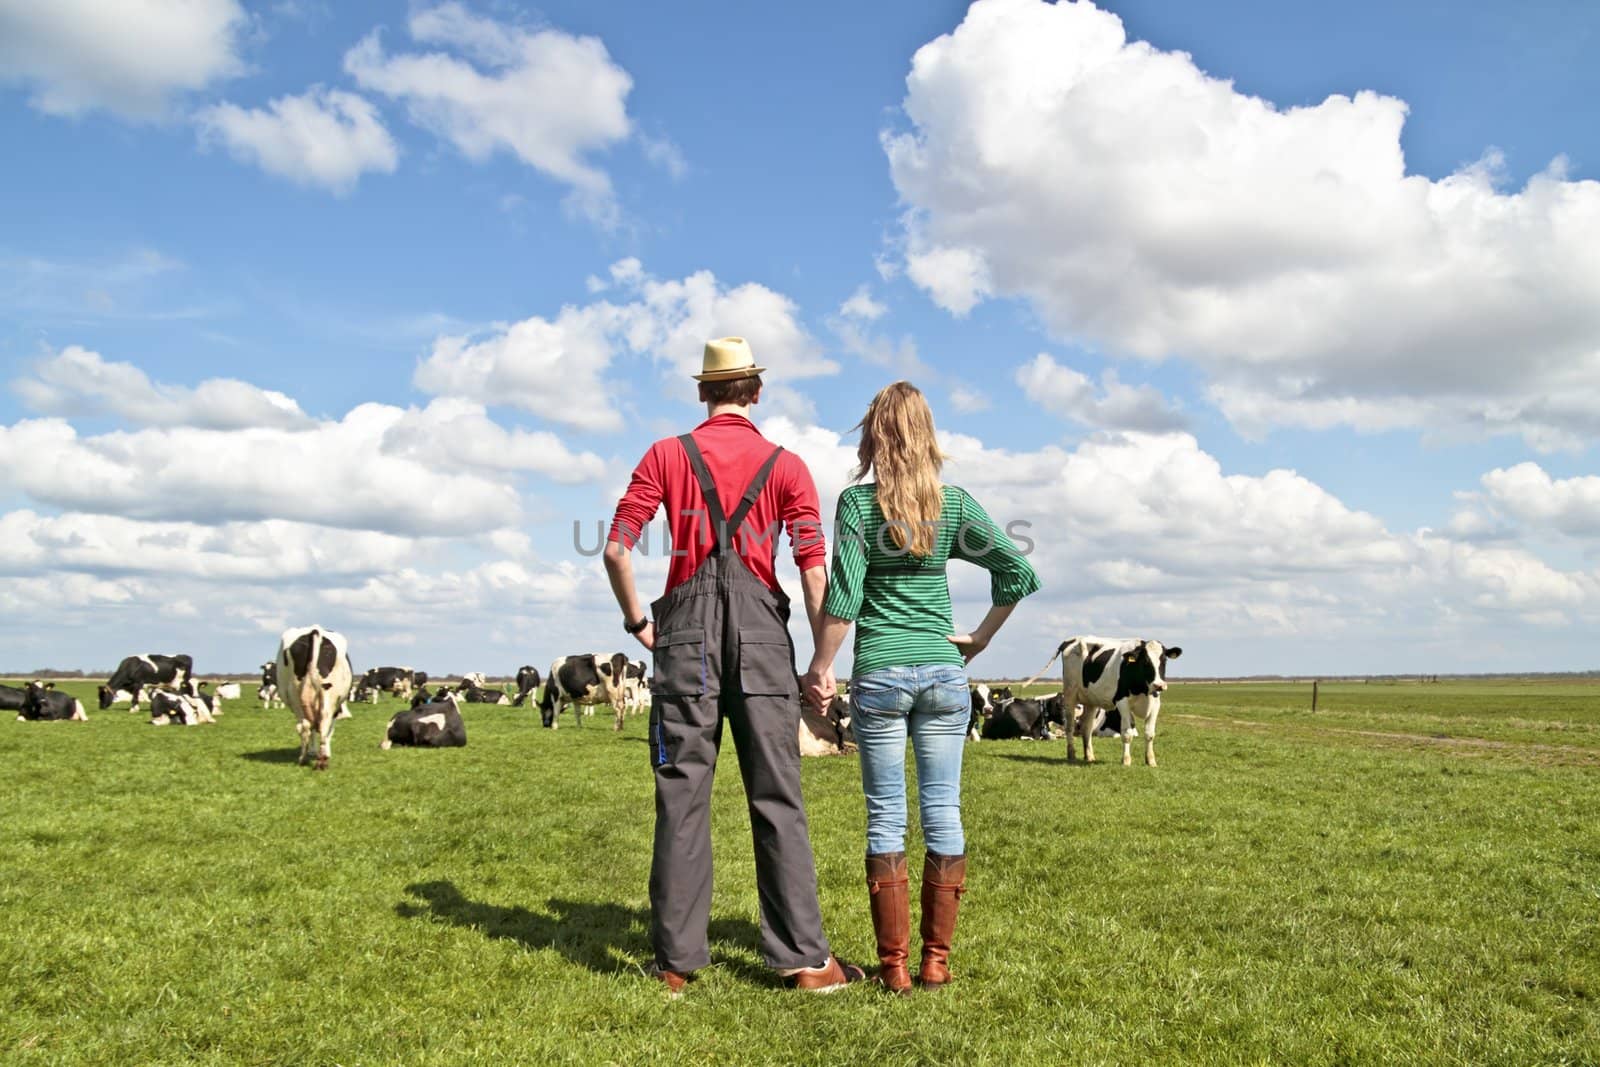 The farmer and his wife proudly looking at their cows by devy